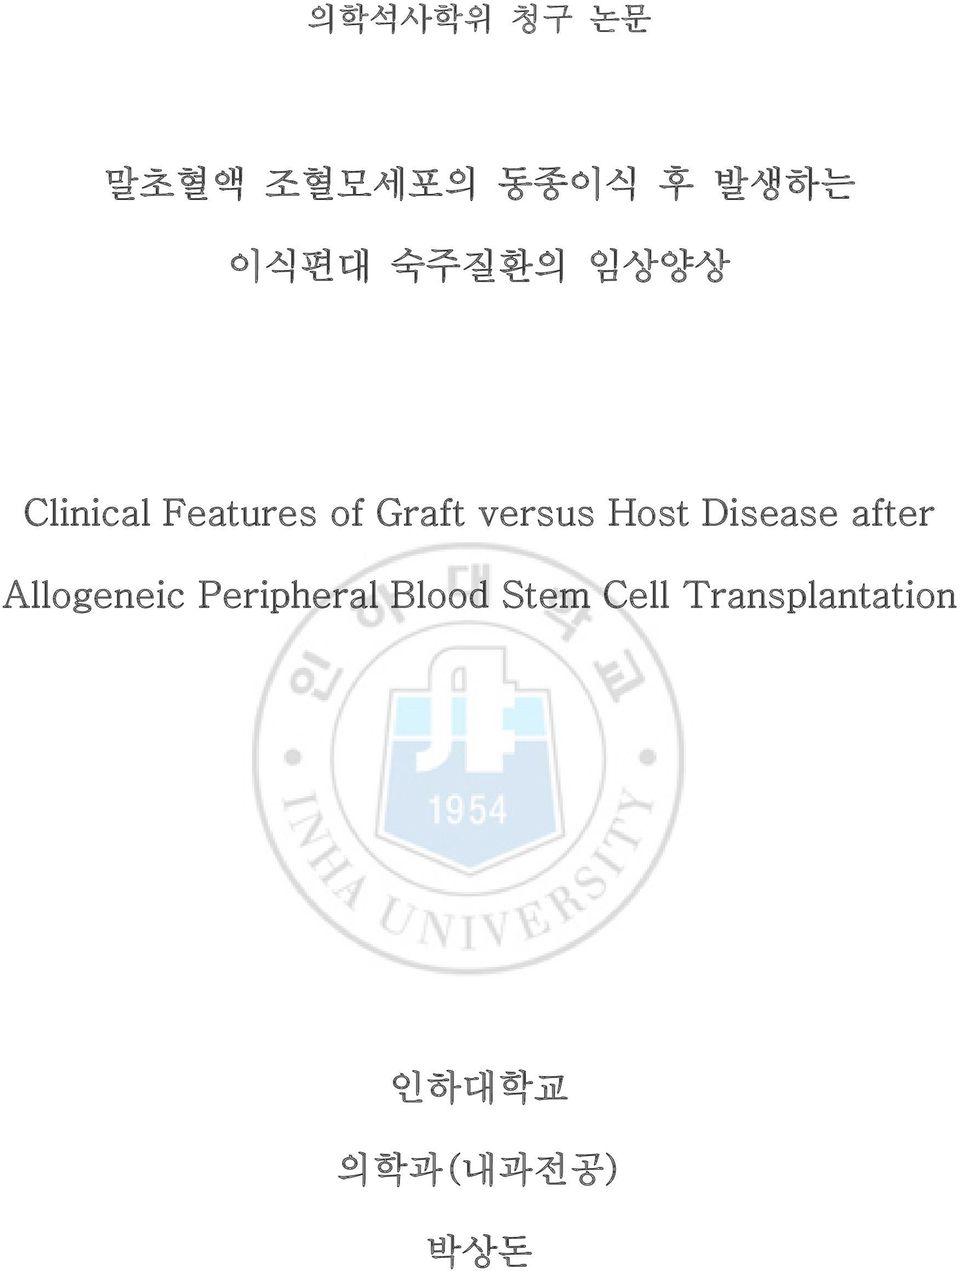 Host Disease after Allogeneic Peripheral